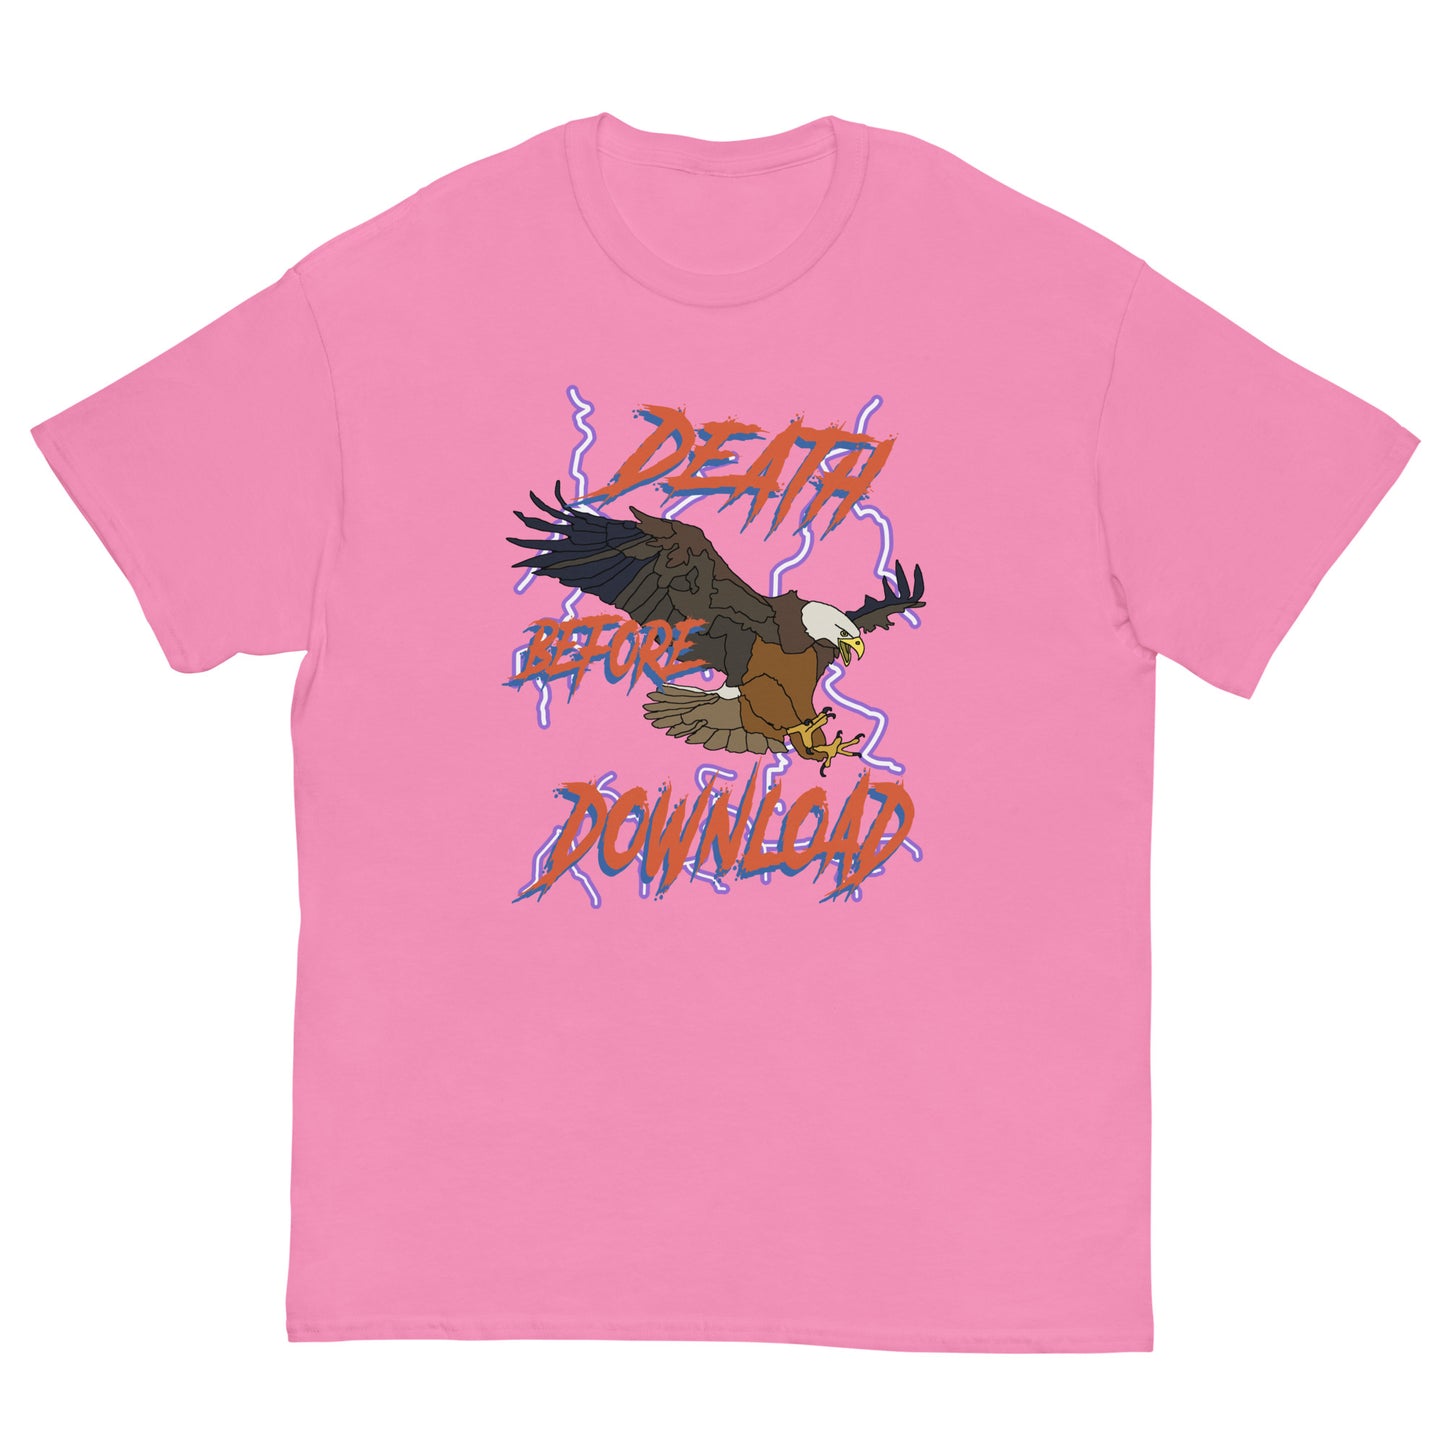 Death before download printed T-shirt 